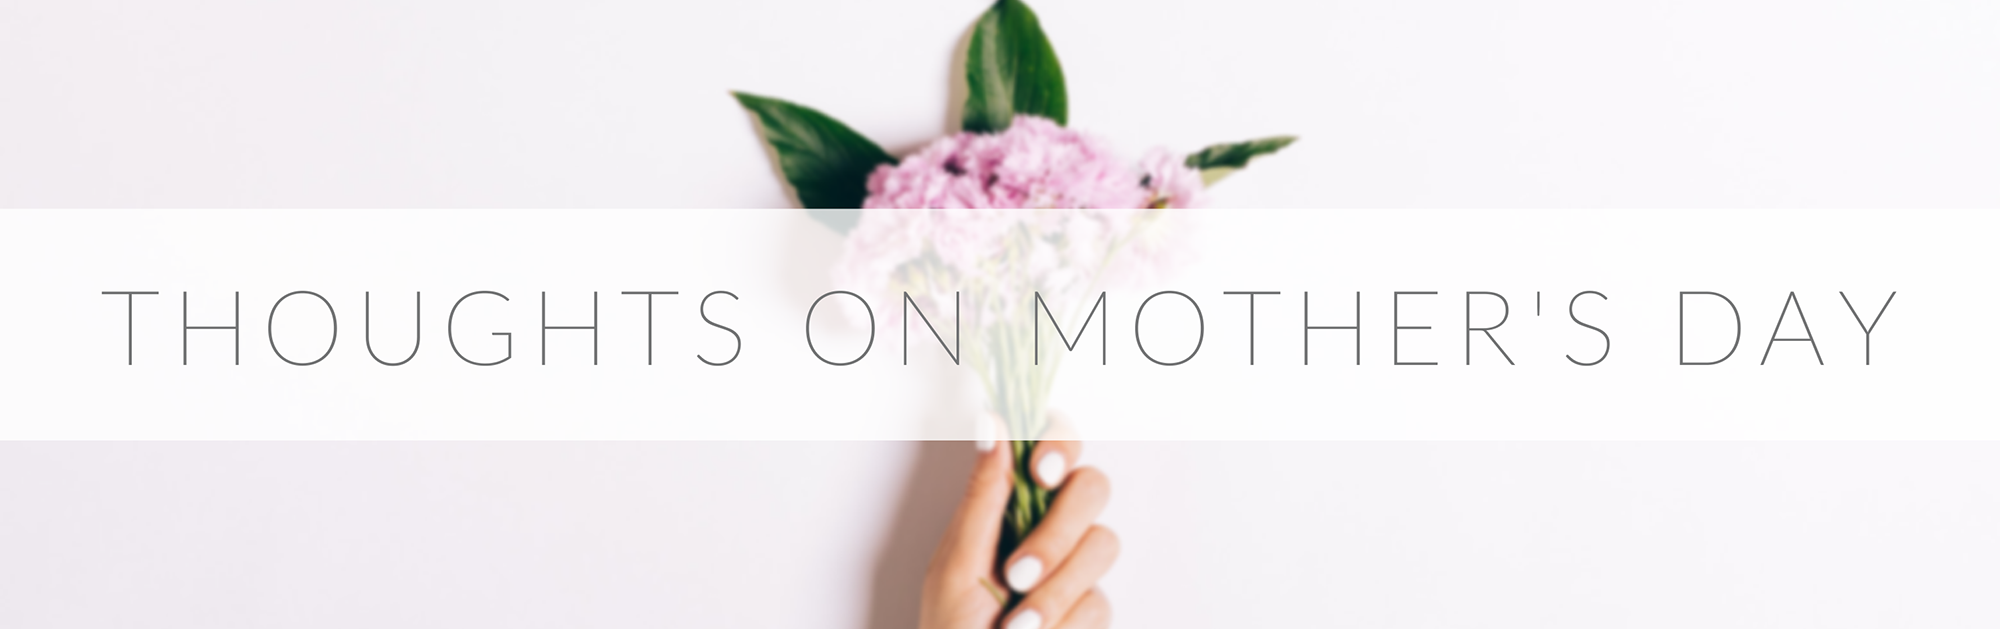 Thoughts On Mother’s Day